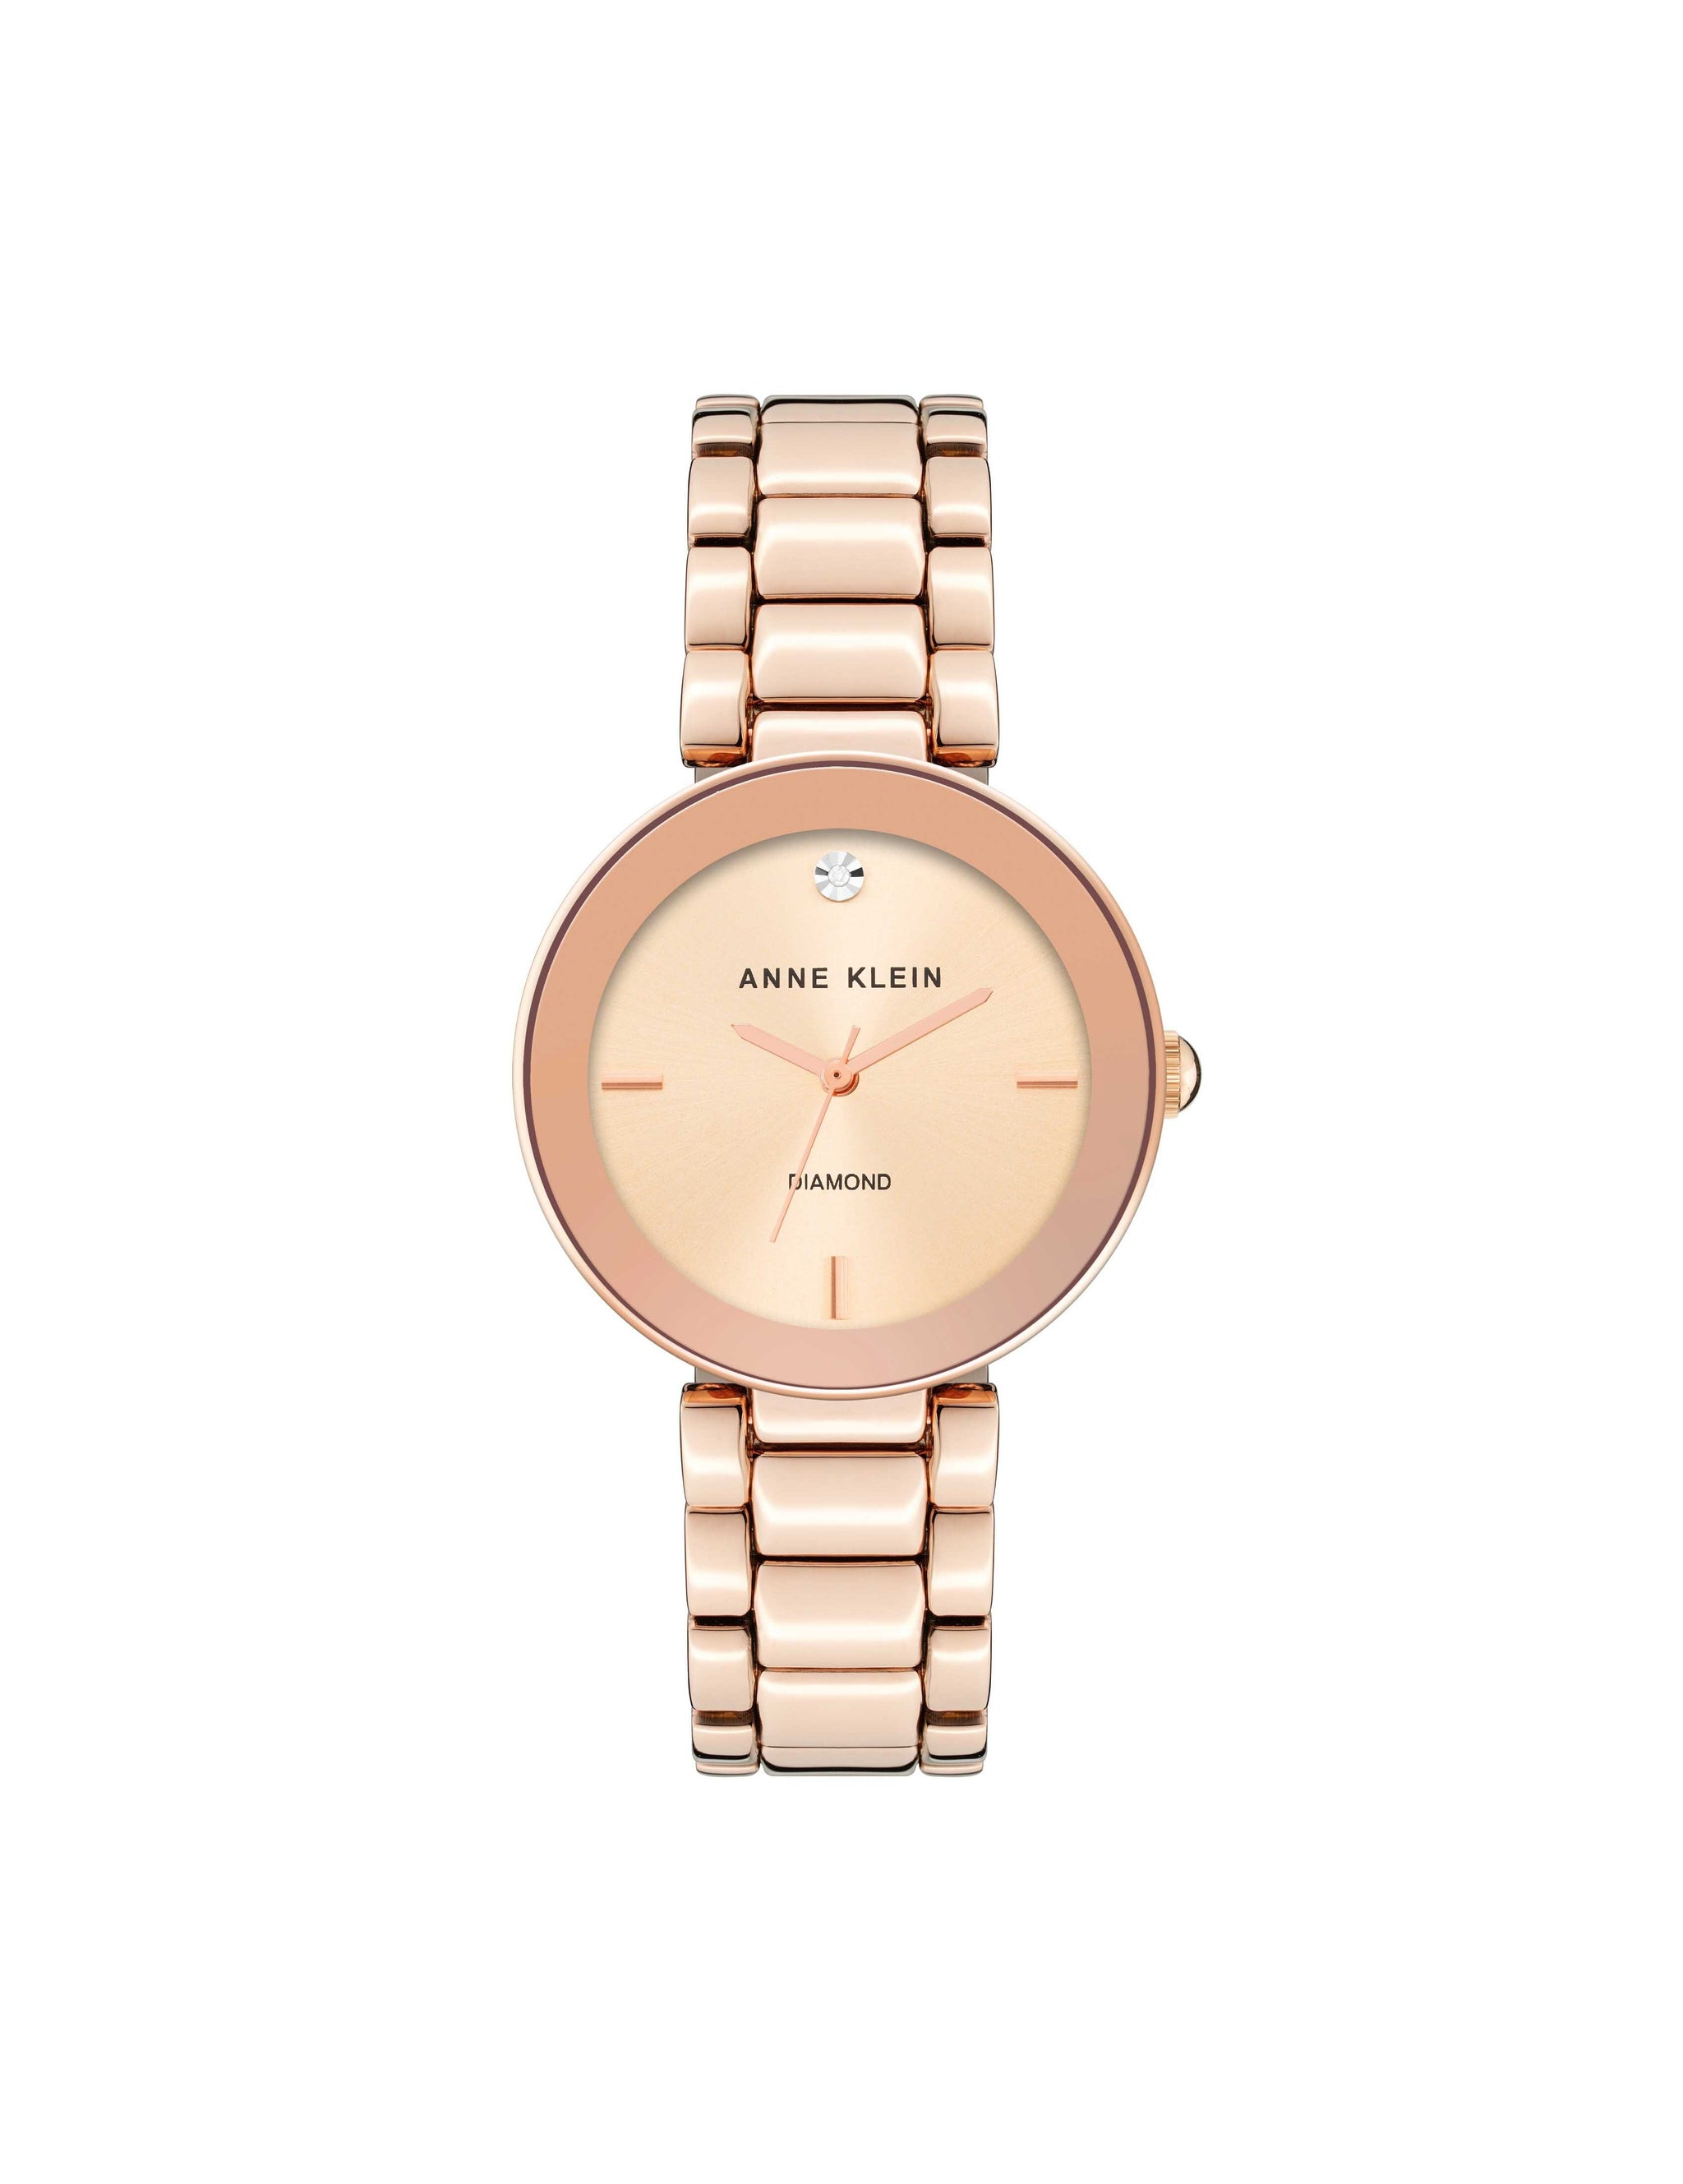 TIMEX Rose Gold Dial Analog Watch - For Women - Buy TIMEX Rose Gold Dial  Analog Watch - For Women TW000X209 Online at Best Prices in India |  Flipkart.com